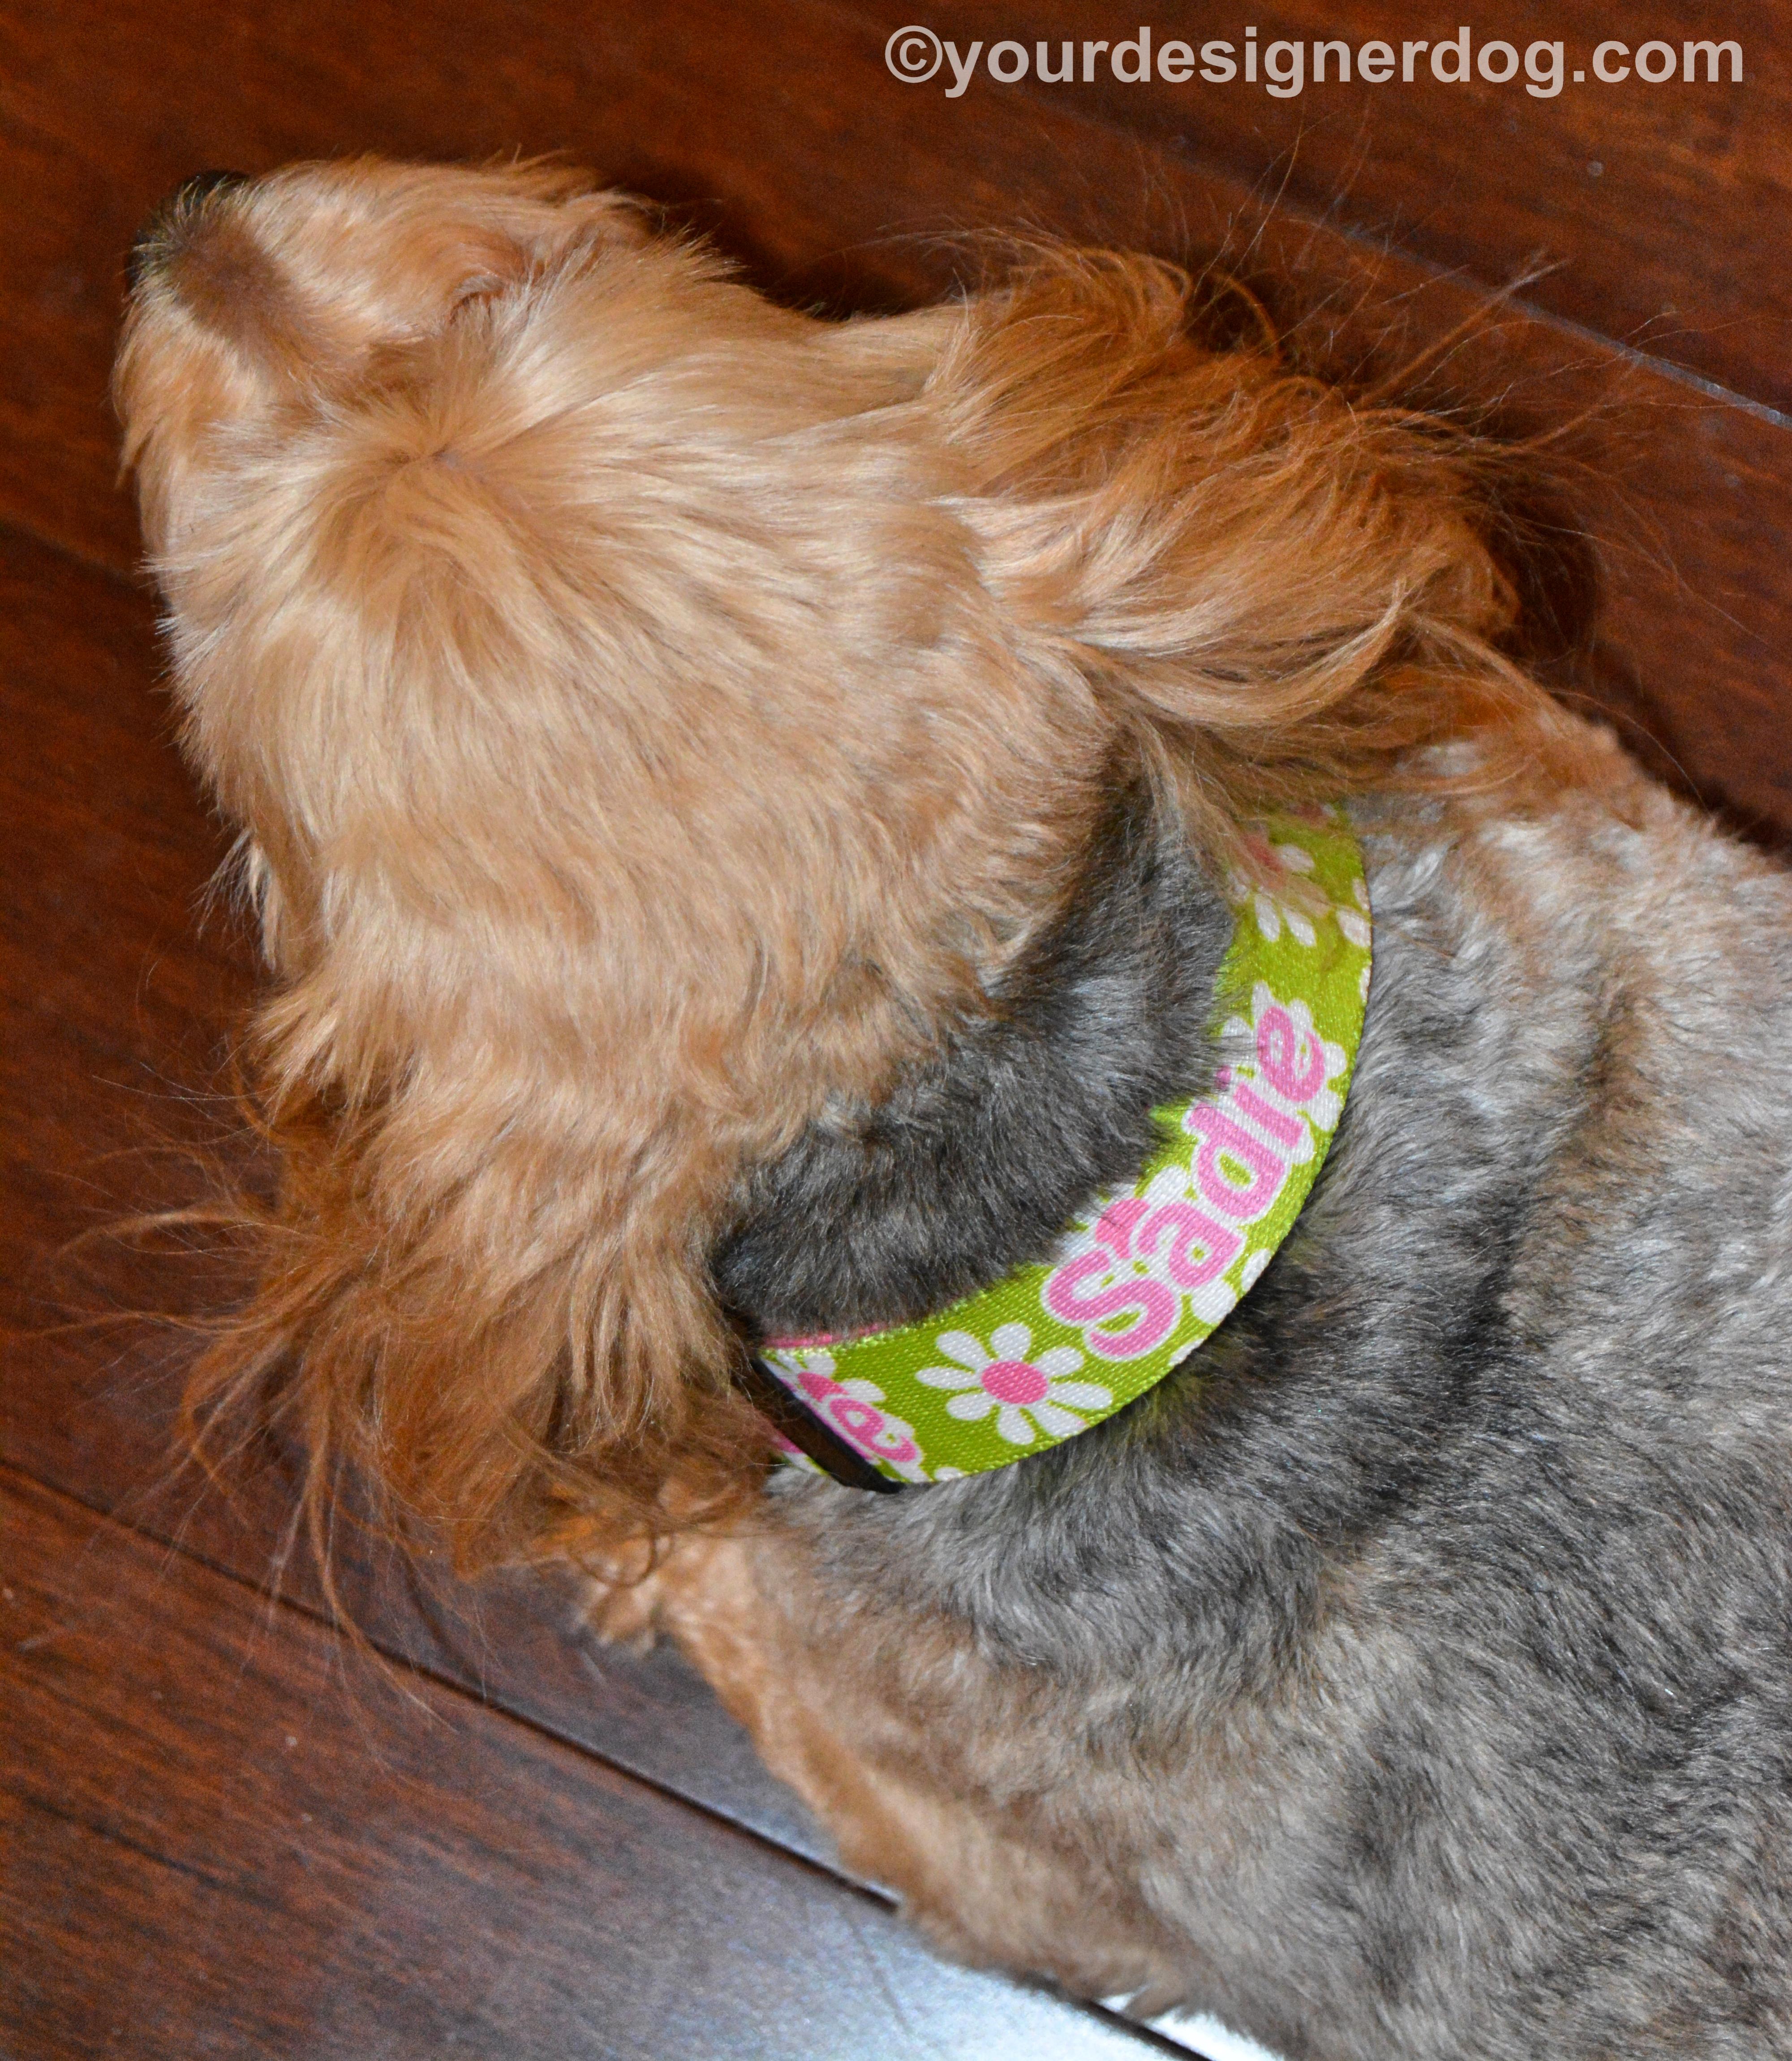 dogs, designer dogs, yorkipoo, yorkie poo, dog collar, personalized